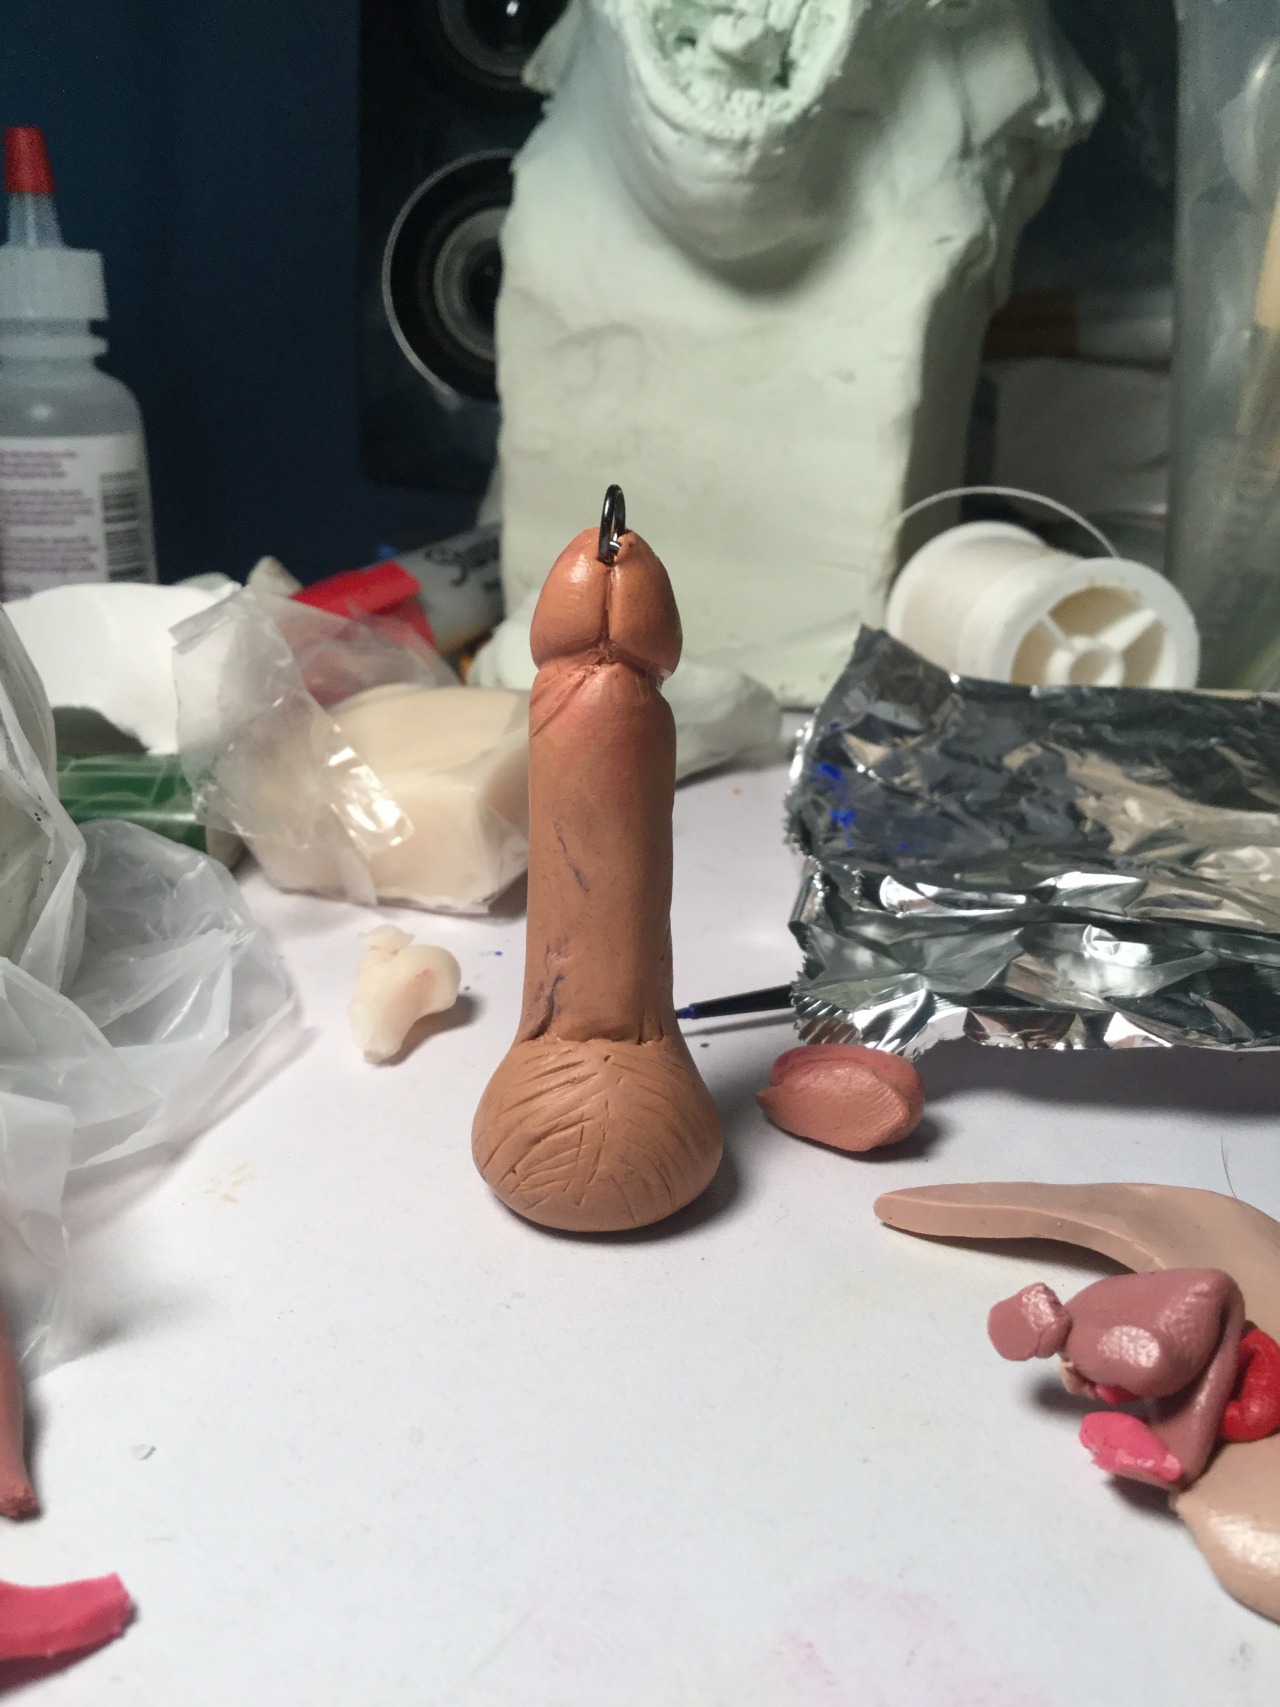 xxxfun-filledxxx:  Stretch pussy charms and custom erotic mini sculptures for sale